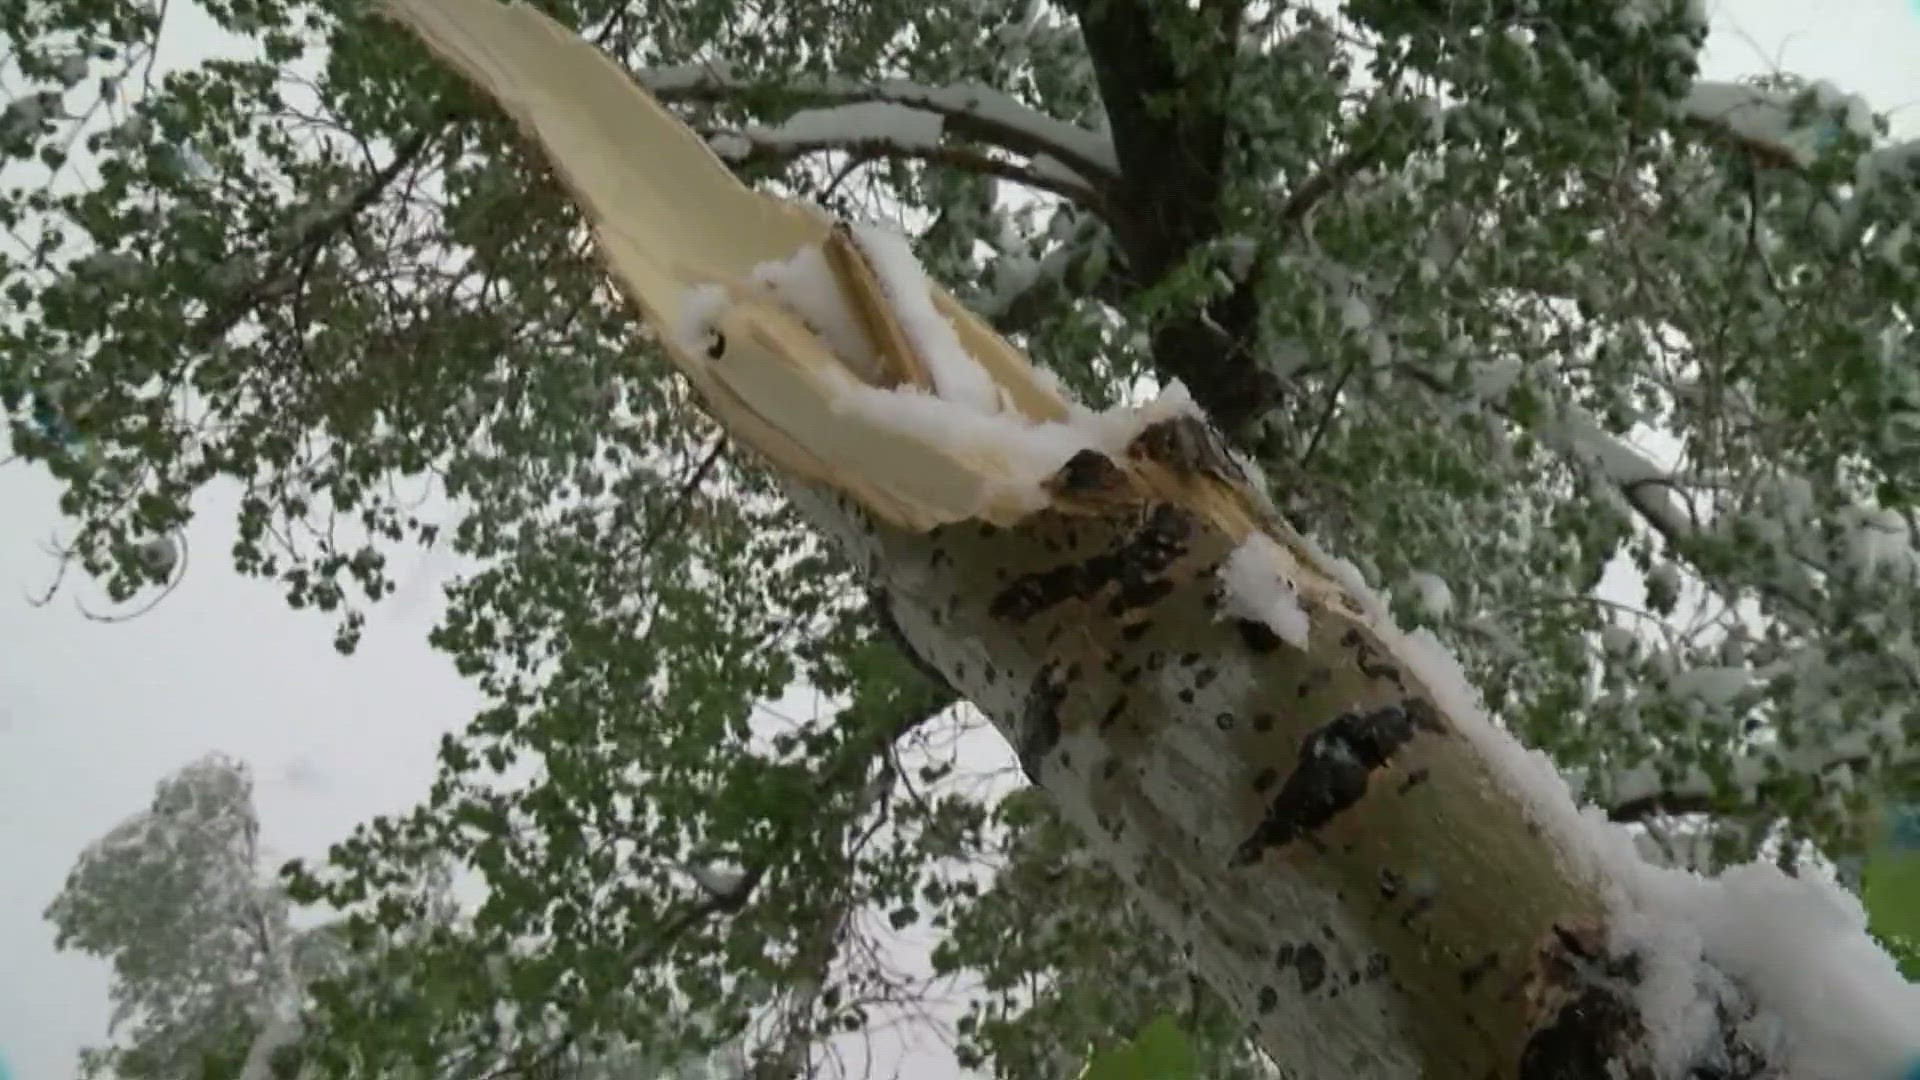 Arborist Jeff Erber gives tips on how to protect trees as Denver's first snow approaches.